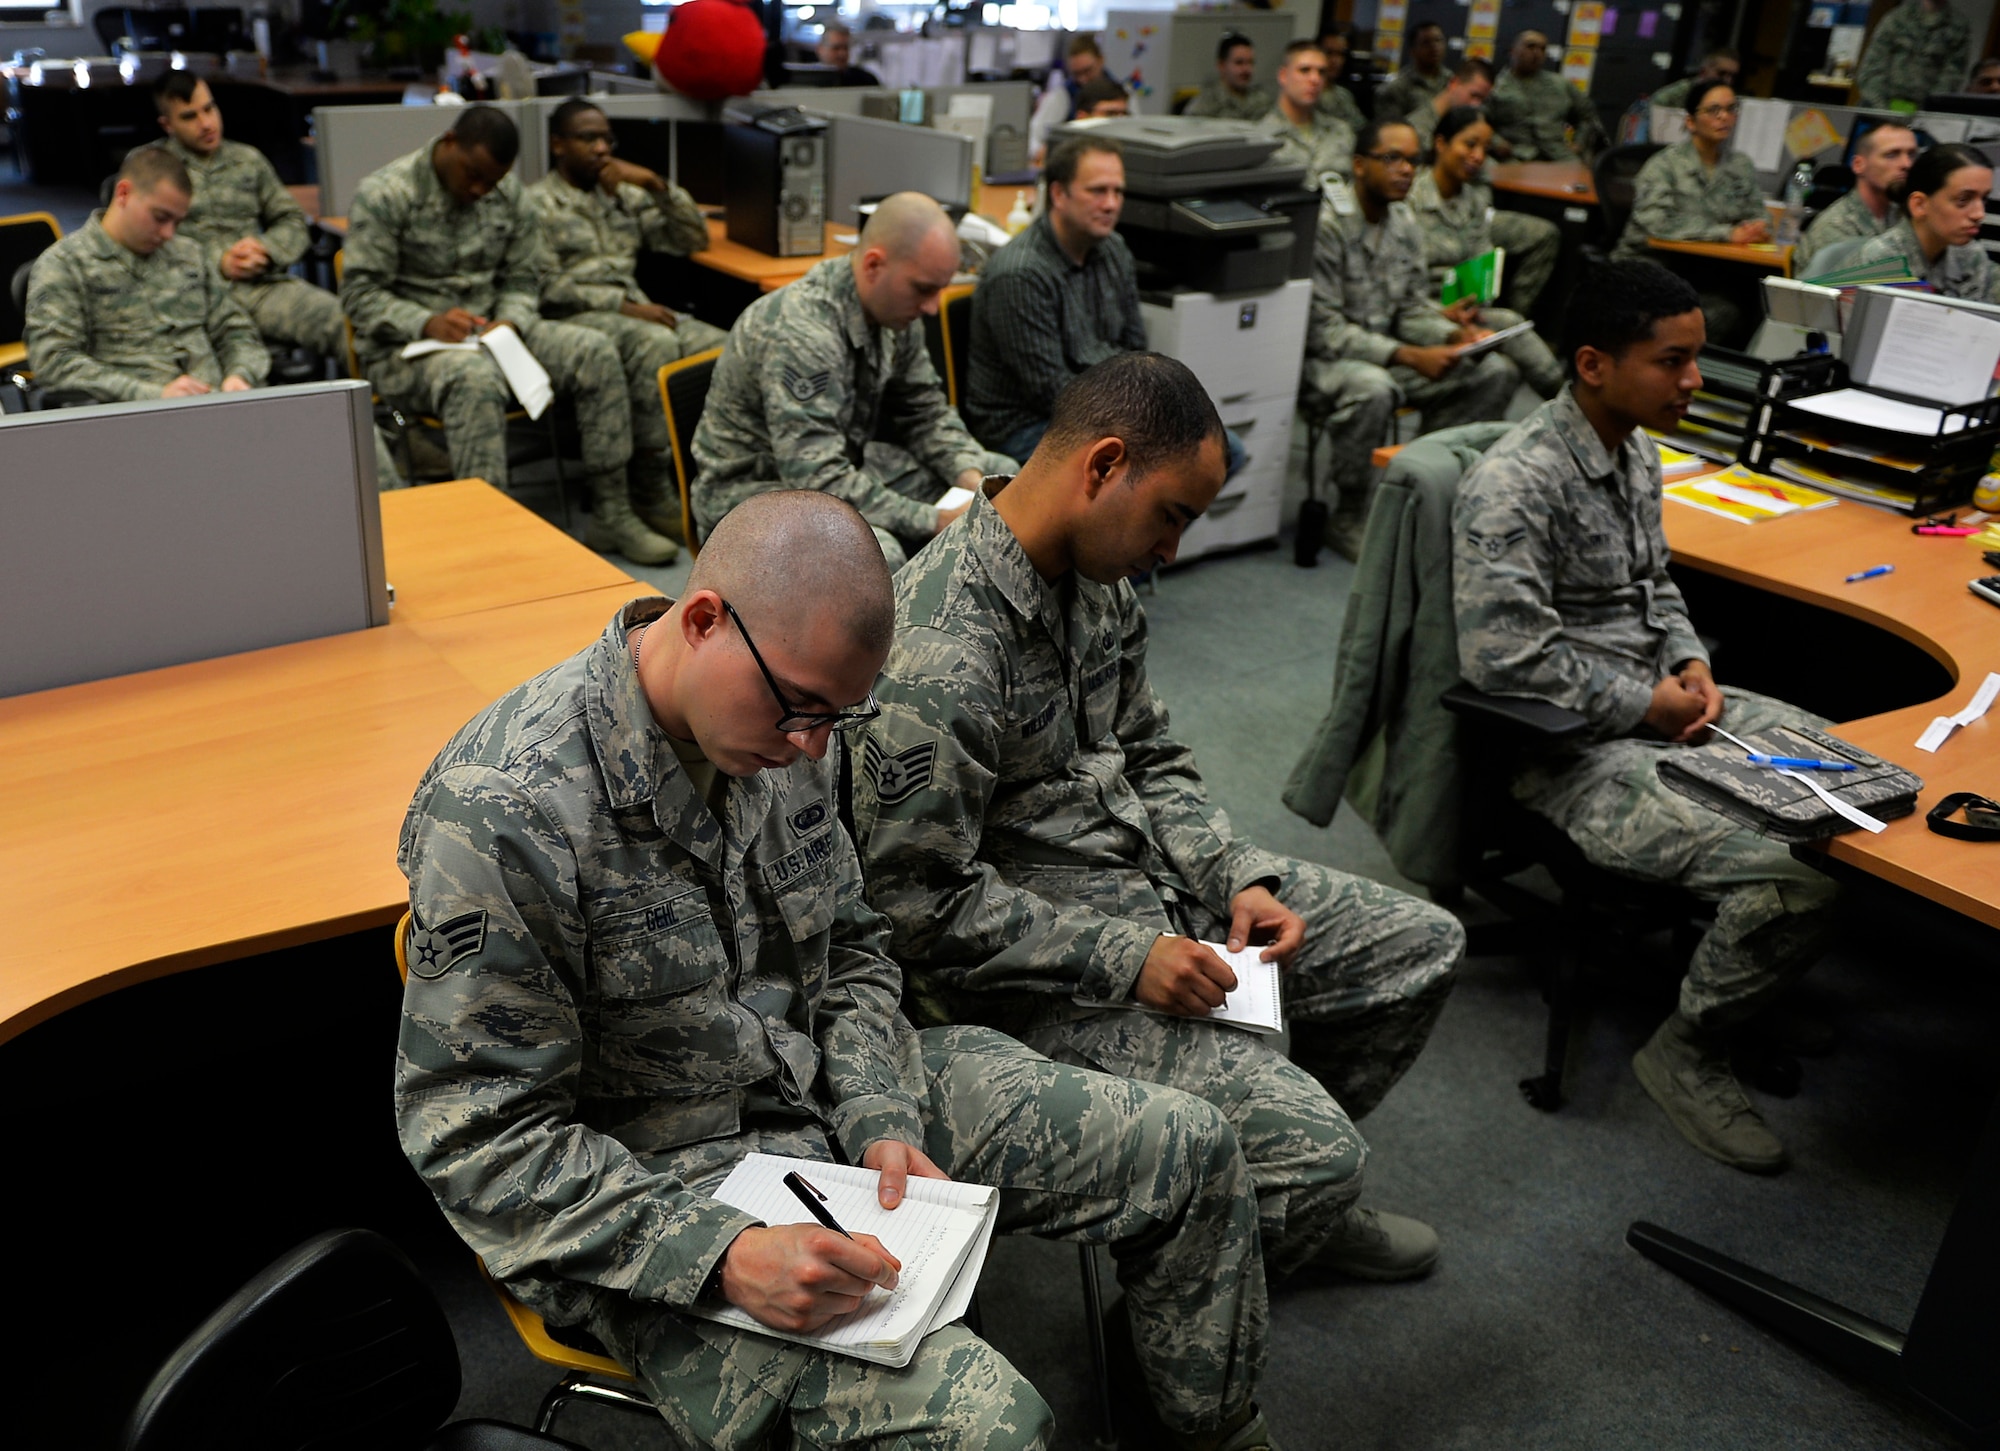 Airmen assigned to the 86th Comptroller Squadron take notes during a talk delivered by Chief Master Sgt. Kaleth Wright, U.S. Air Forces in Europe and Air Forces Africa command chief, at Ramstein Air Base, Germany, Nov. 23, 2016. The future 18th Chief Master Sgt. of the Air Force discussed topics with Airmen ranging from leadership, mentorship, and developments in the Air Force. (U.S. Air Force photo by Airman 1st Class Joshua Magbanua)